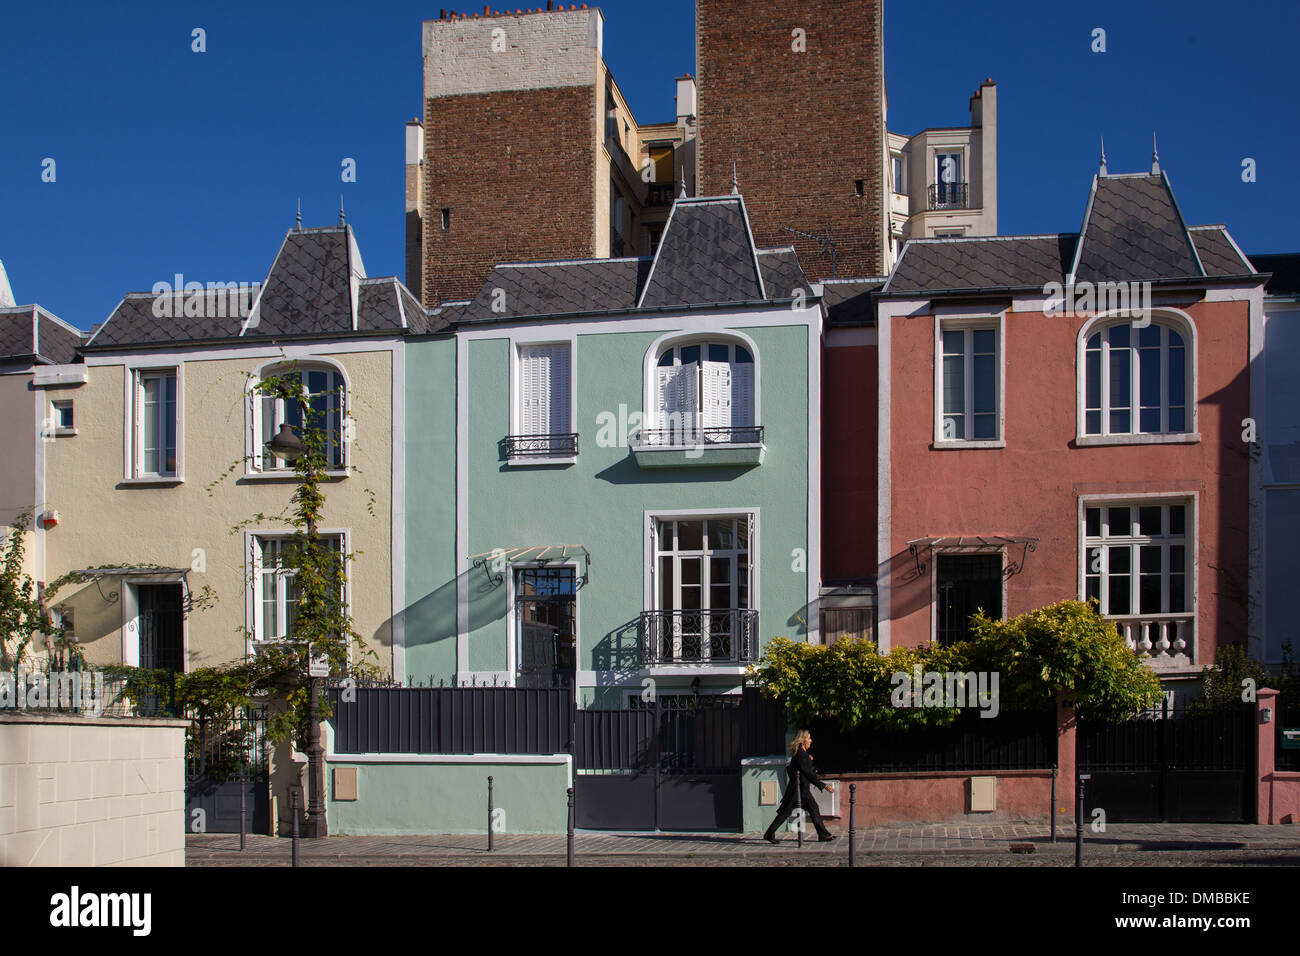 THE STREET RUE DIEULAFOY, SITUATED IN THE MAISON-BLANCHE QUARTER, RESIDENTIAL AREA, 13TH ARRONDISSEMENT, PARIS (75), ILE-DE-FRANCE, FRANCE Stock Photo